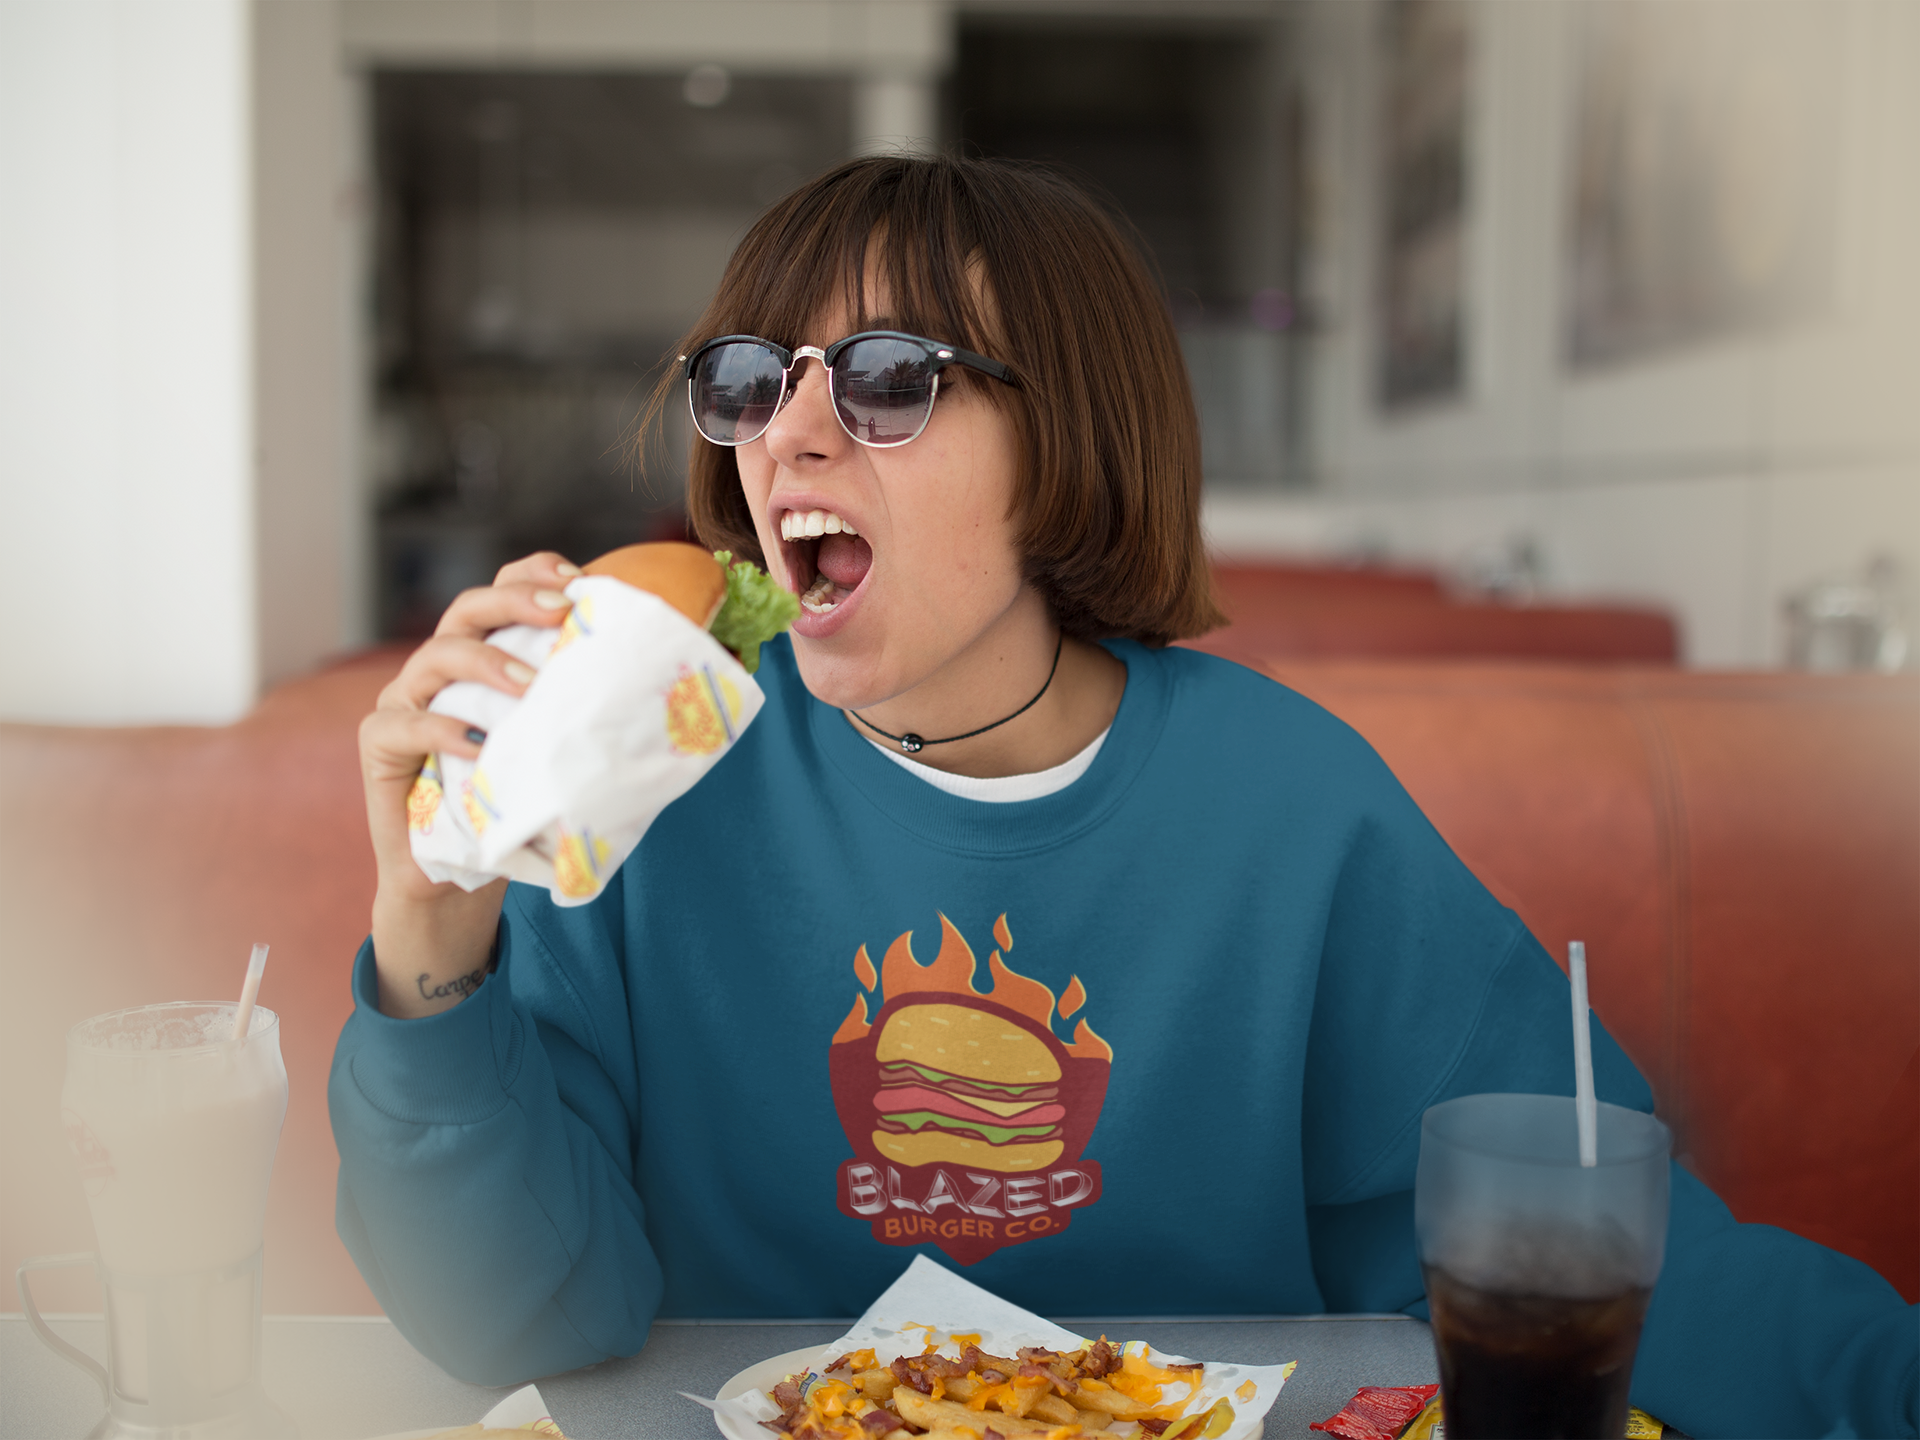 Crewneck mockup of a trendy girl with sunglasses and short hair eating a burger a12658